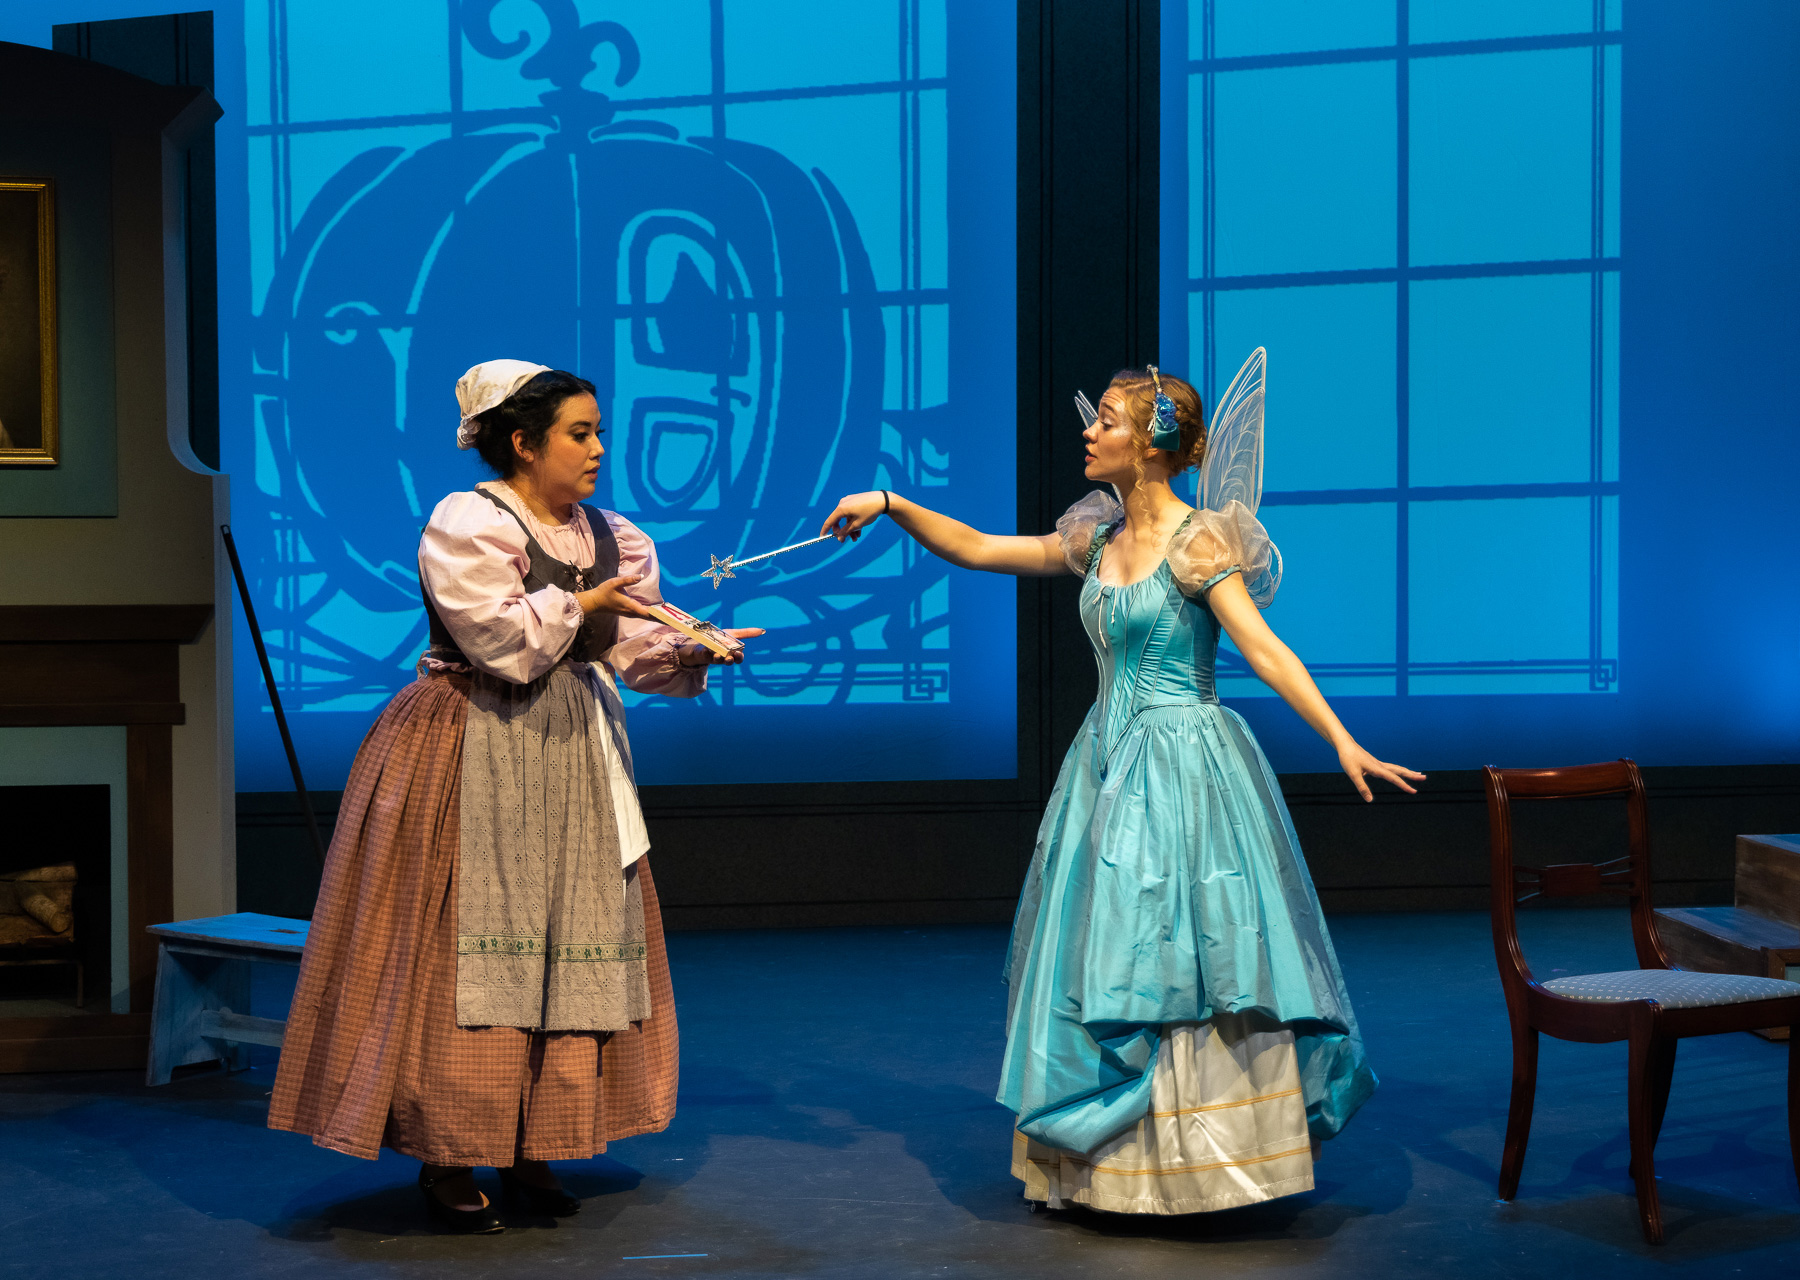 Dewberry School of Music students on stage in the Opera Cinderella